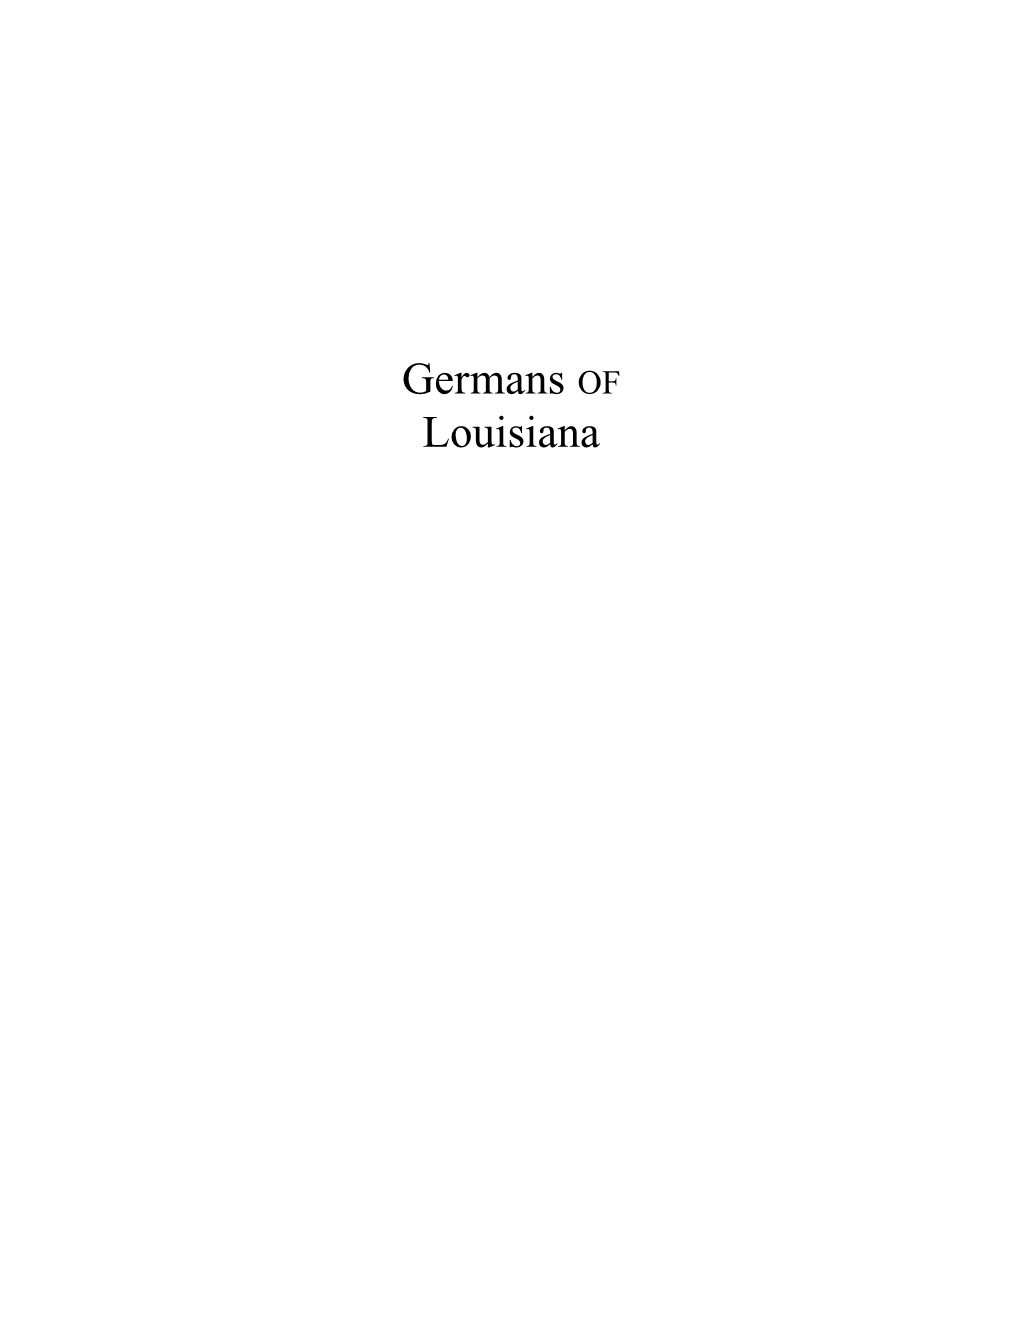 Germans of Louisiana German Settlements and Place Names in Louisiana